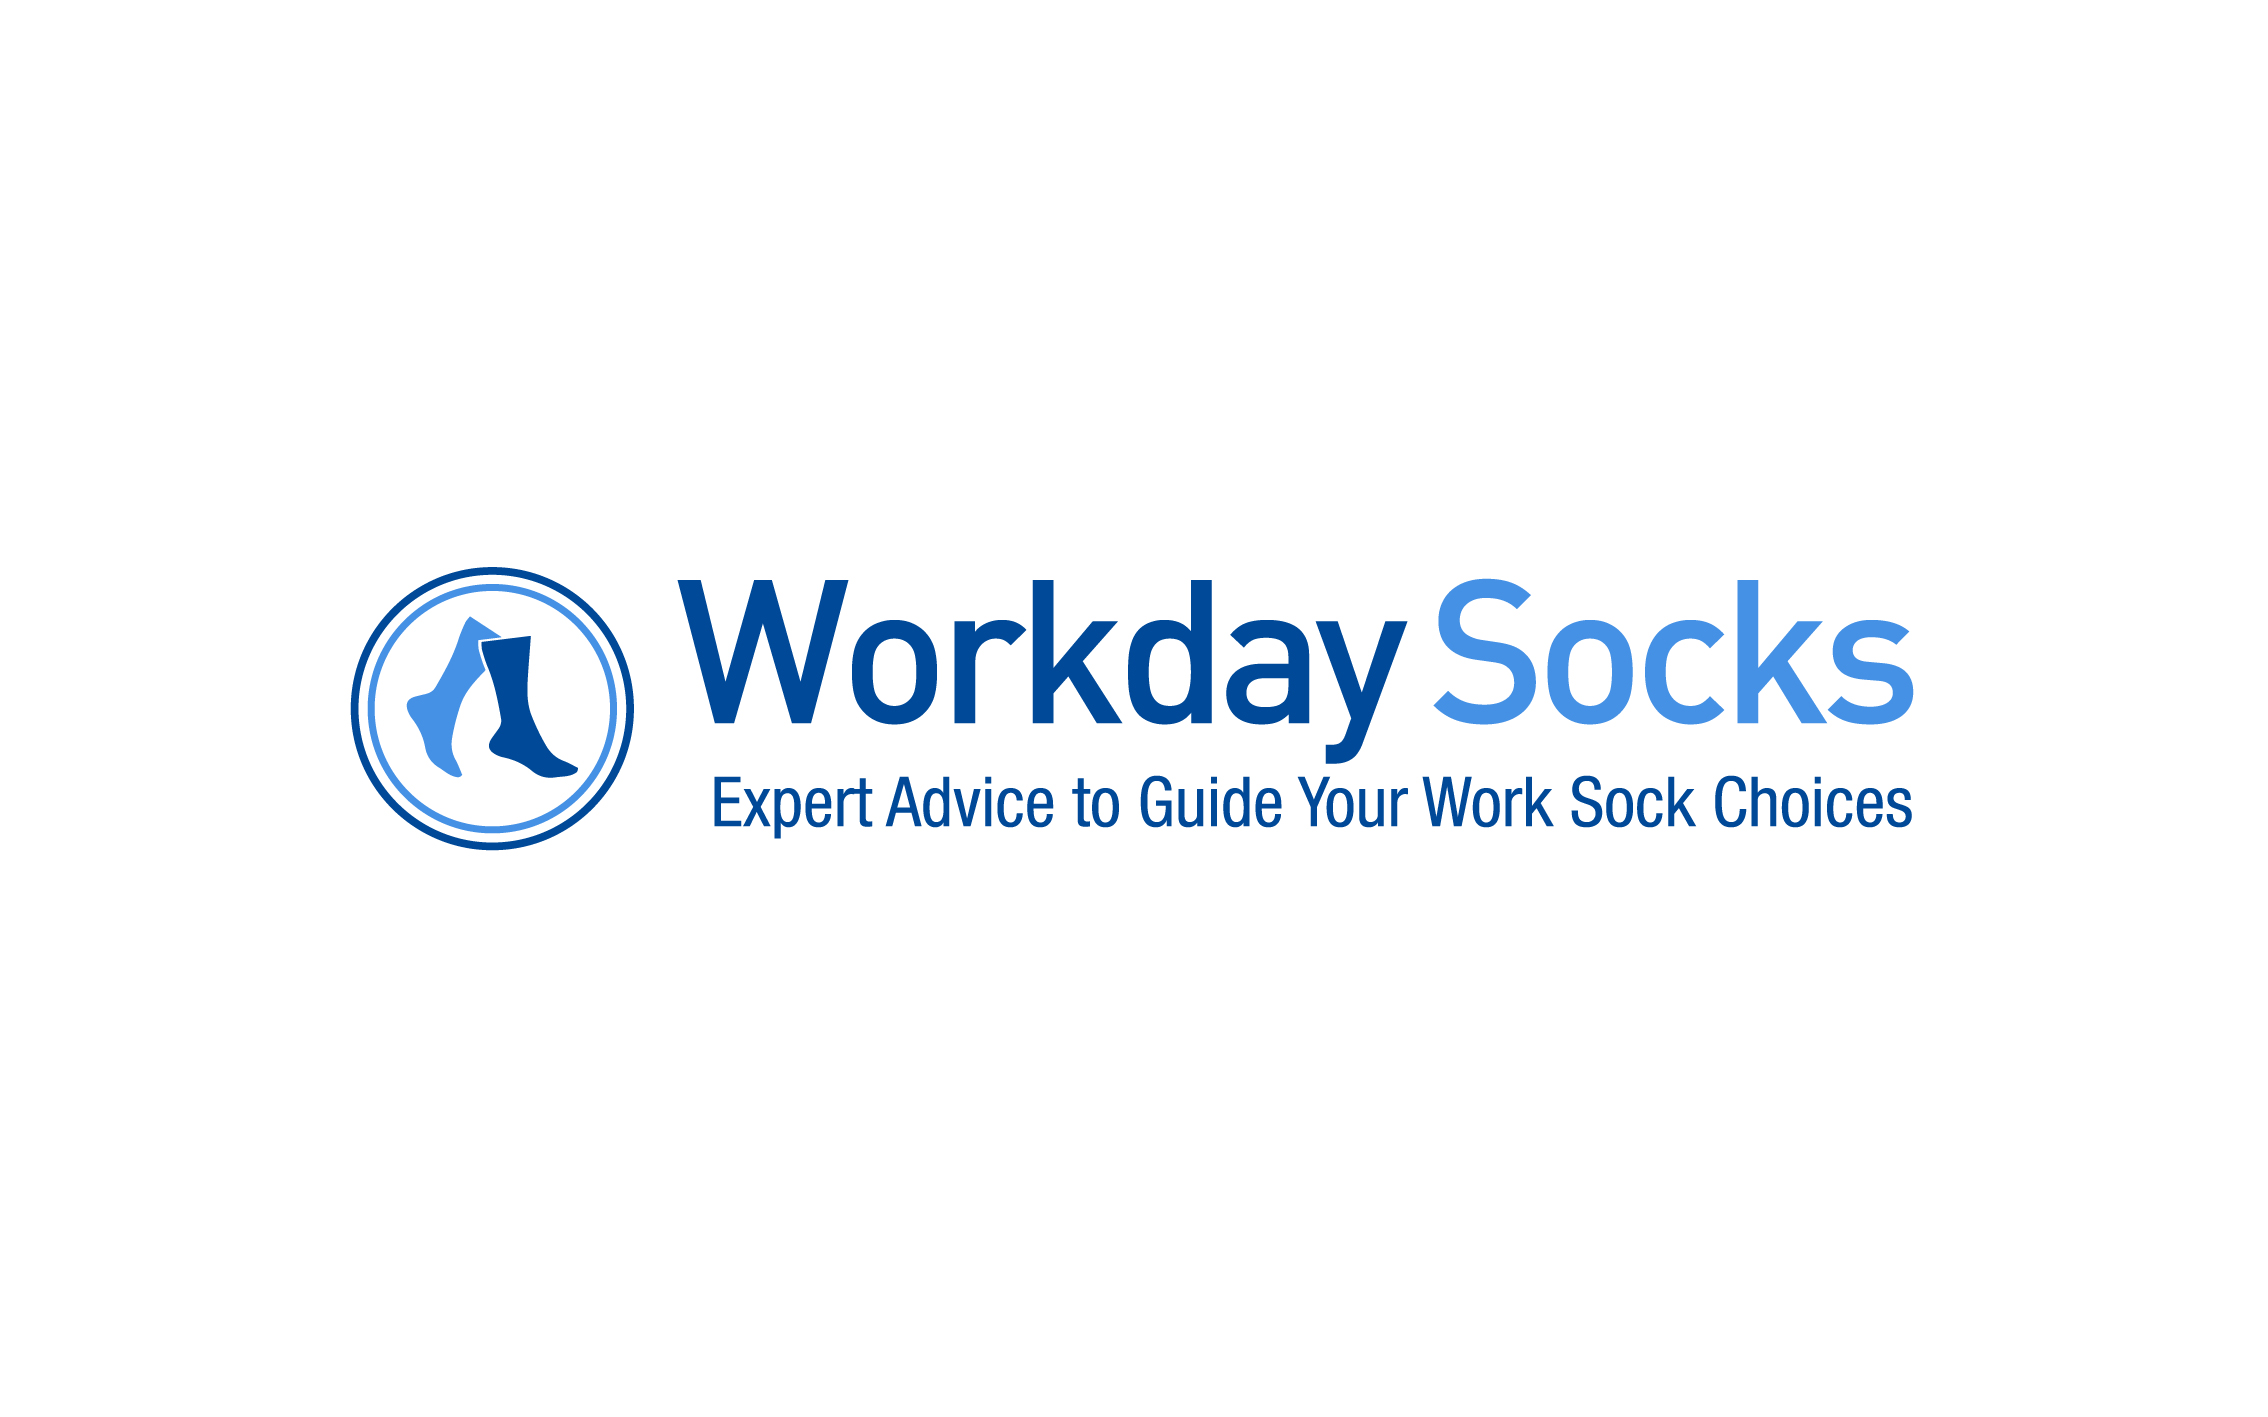 Workday sock reviews